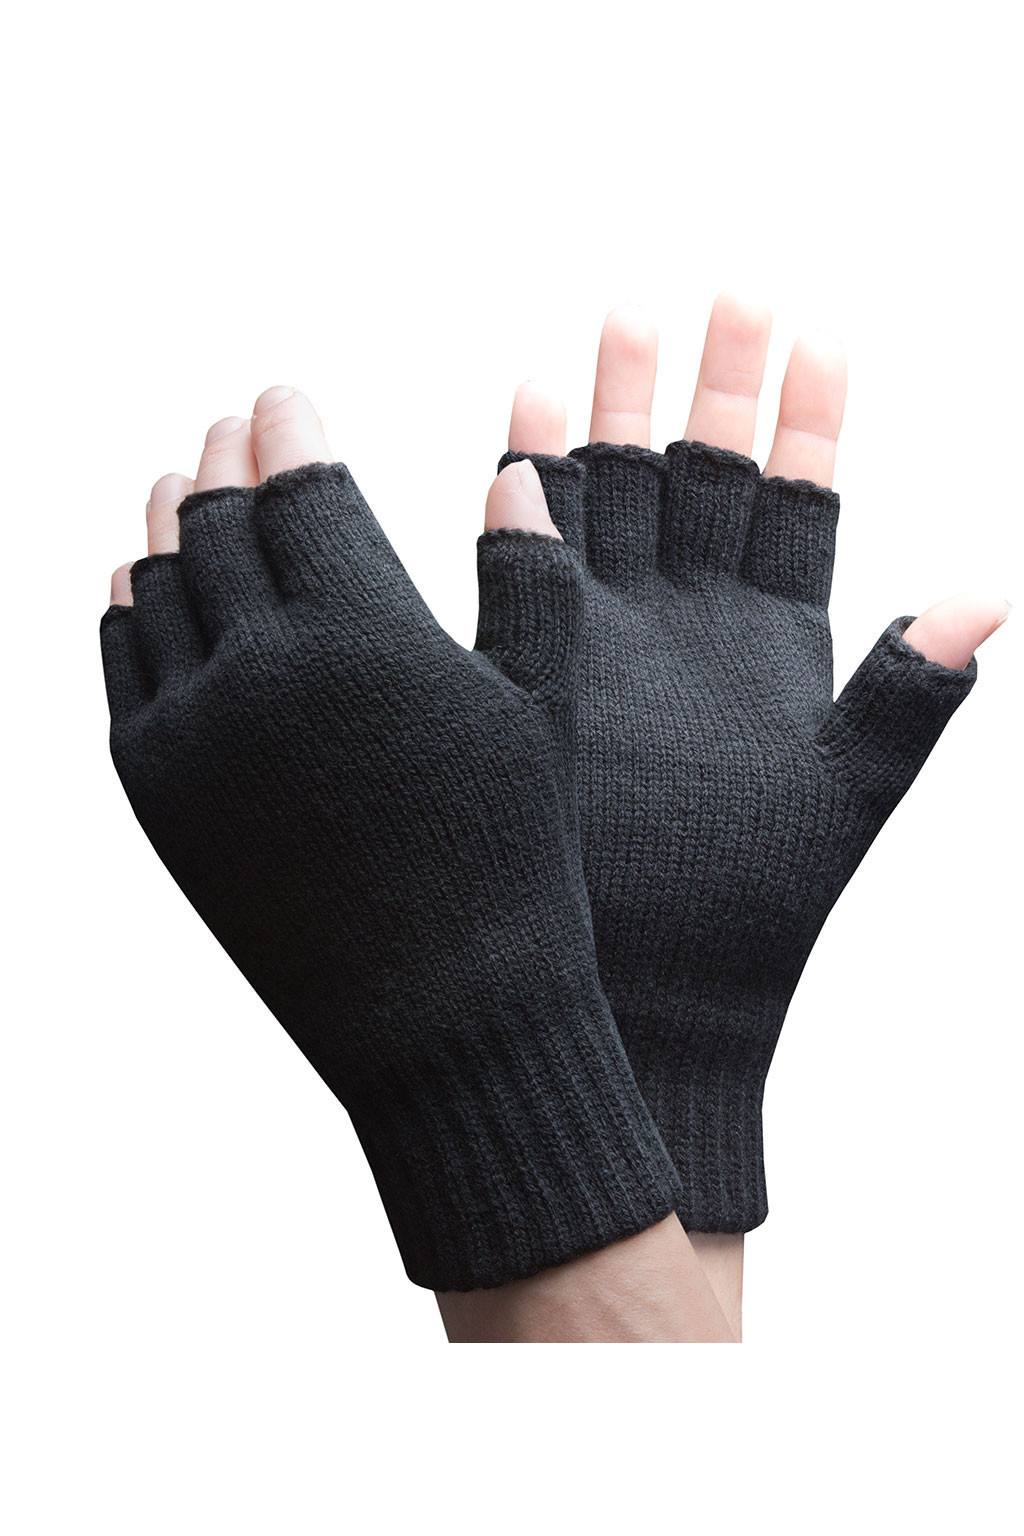 Men's Comfort Zone Fingerless Glove with Reflective Piping on Handback